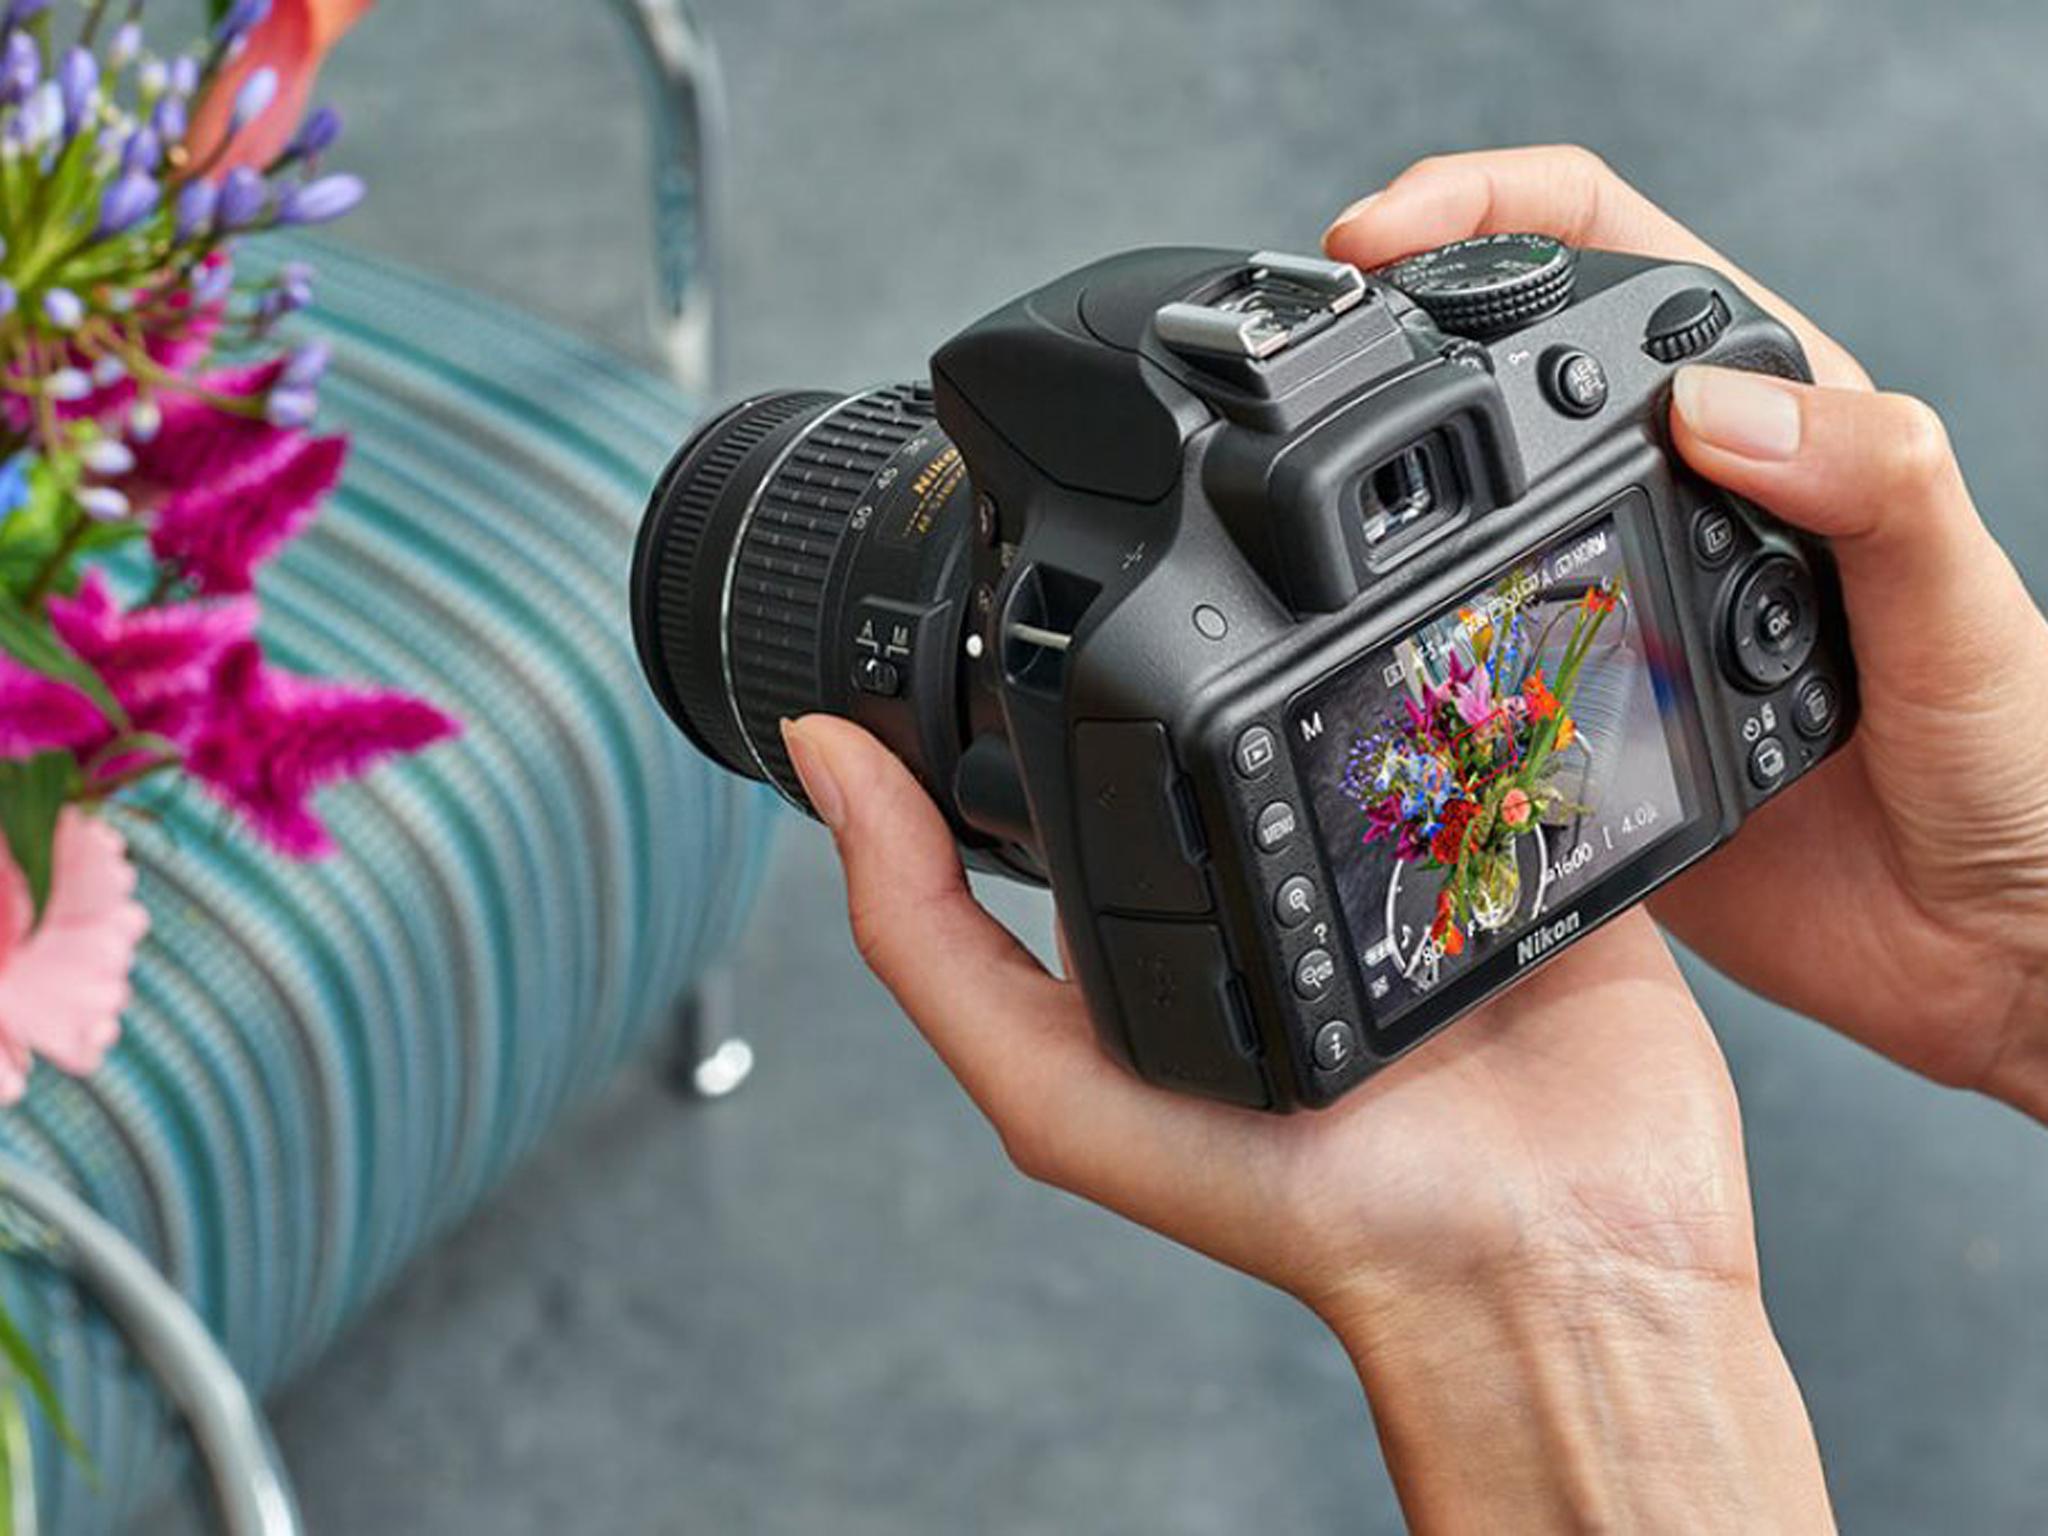 The 10 best DSLRs for Best Professional Cameras | All About Camera ...